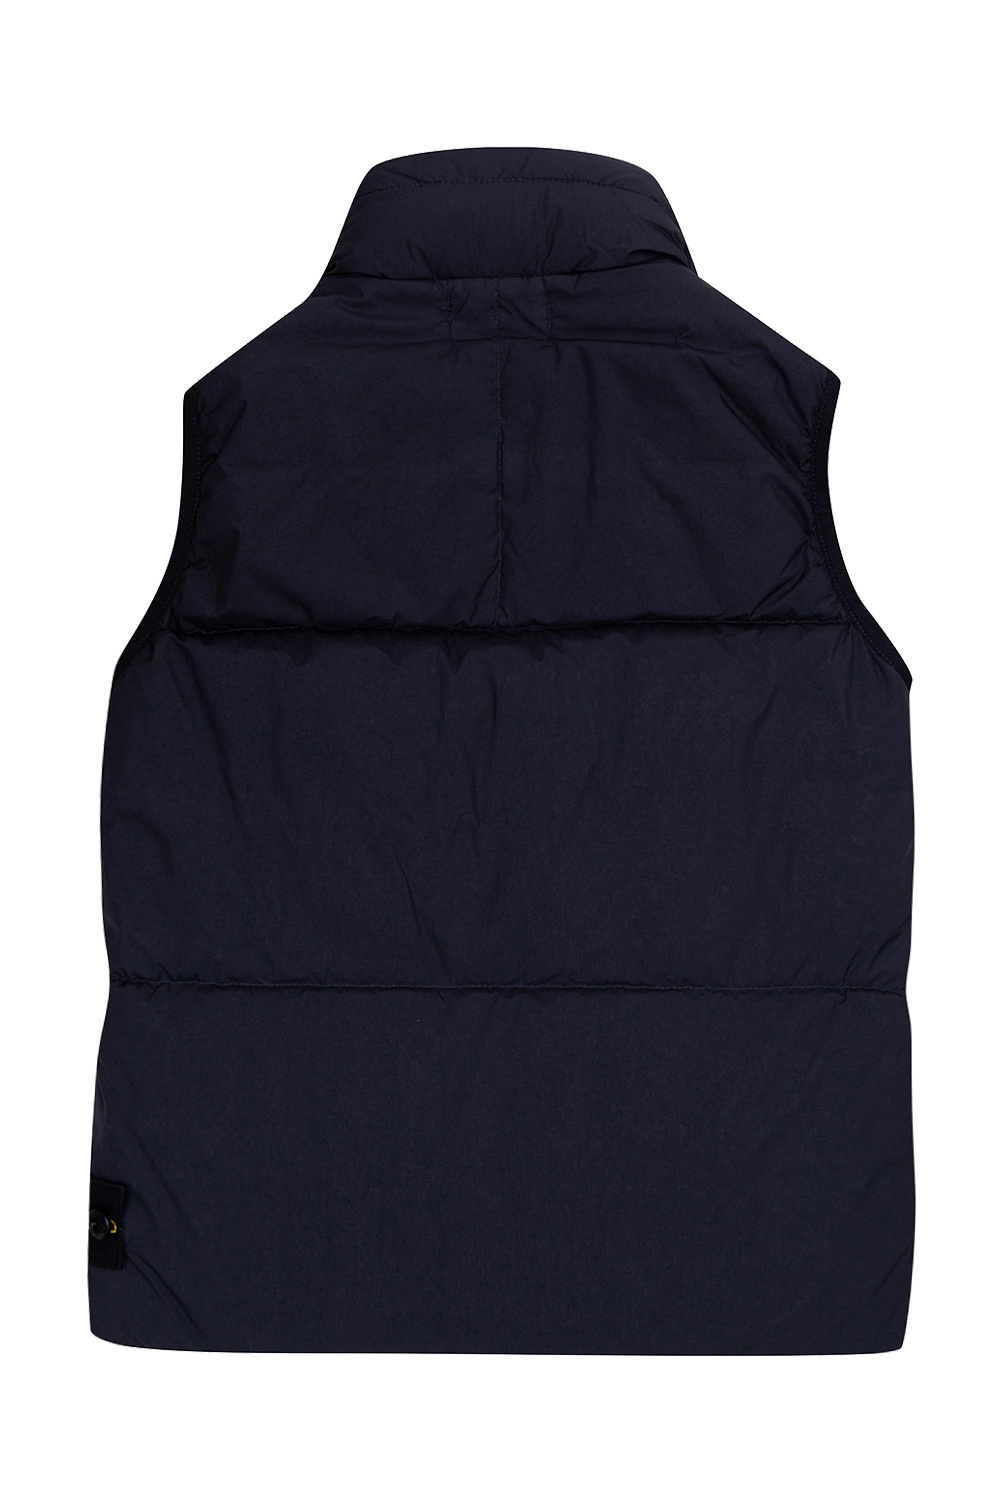 Stone Island Kids Vest with concealed hood | Kids's Boys clothes (4-14 ...